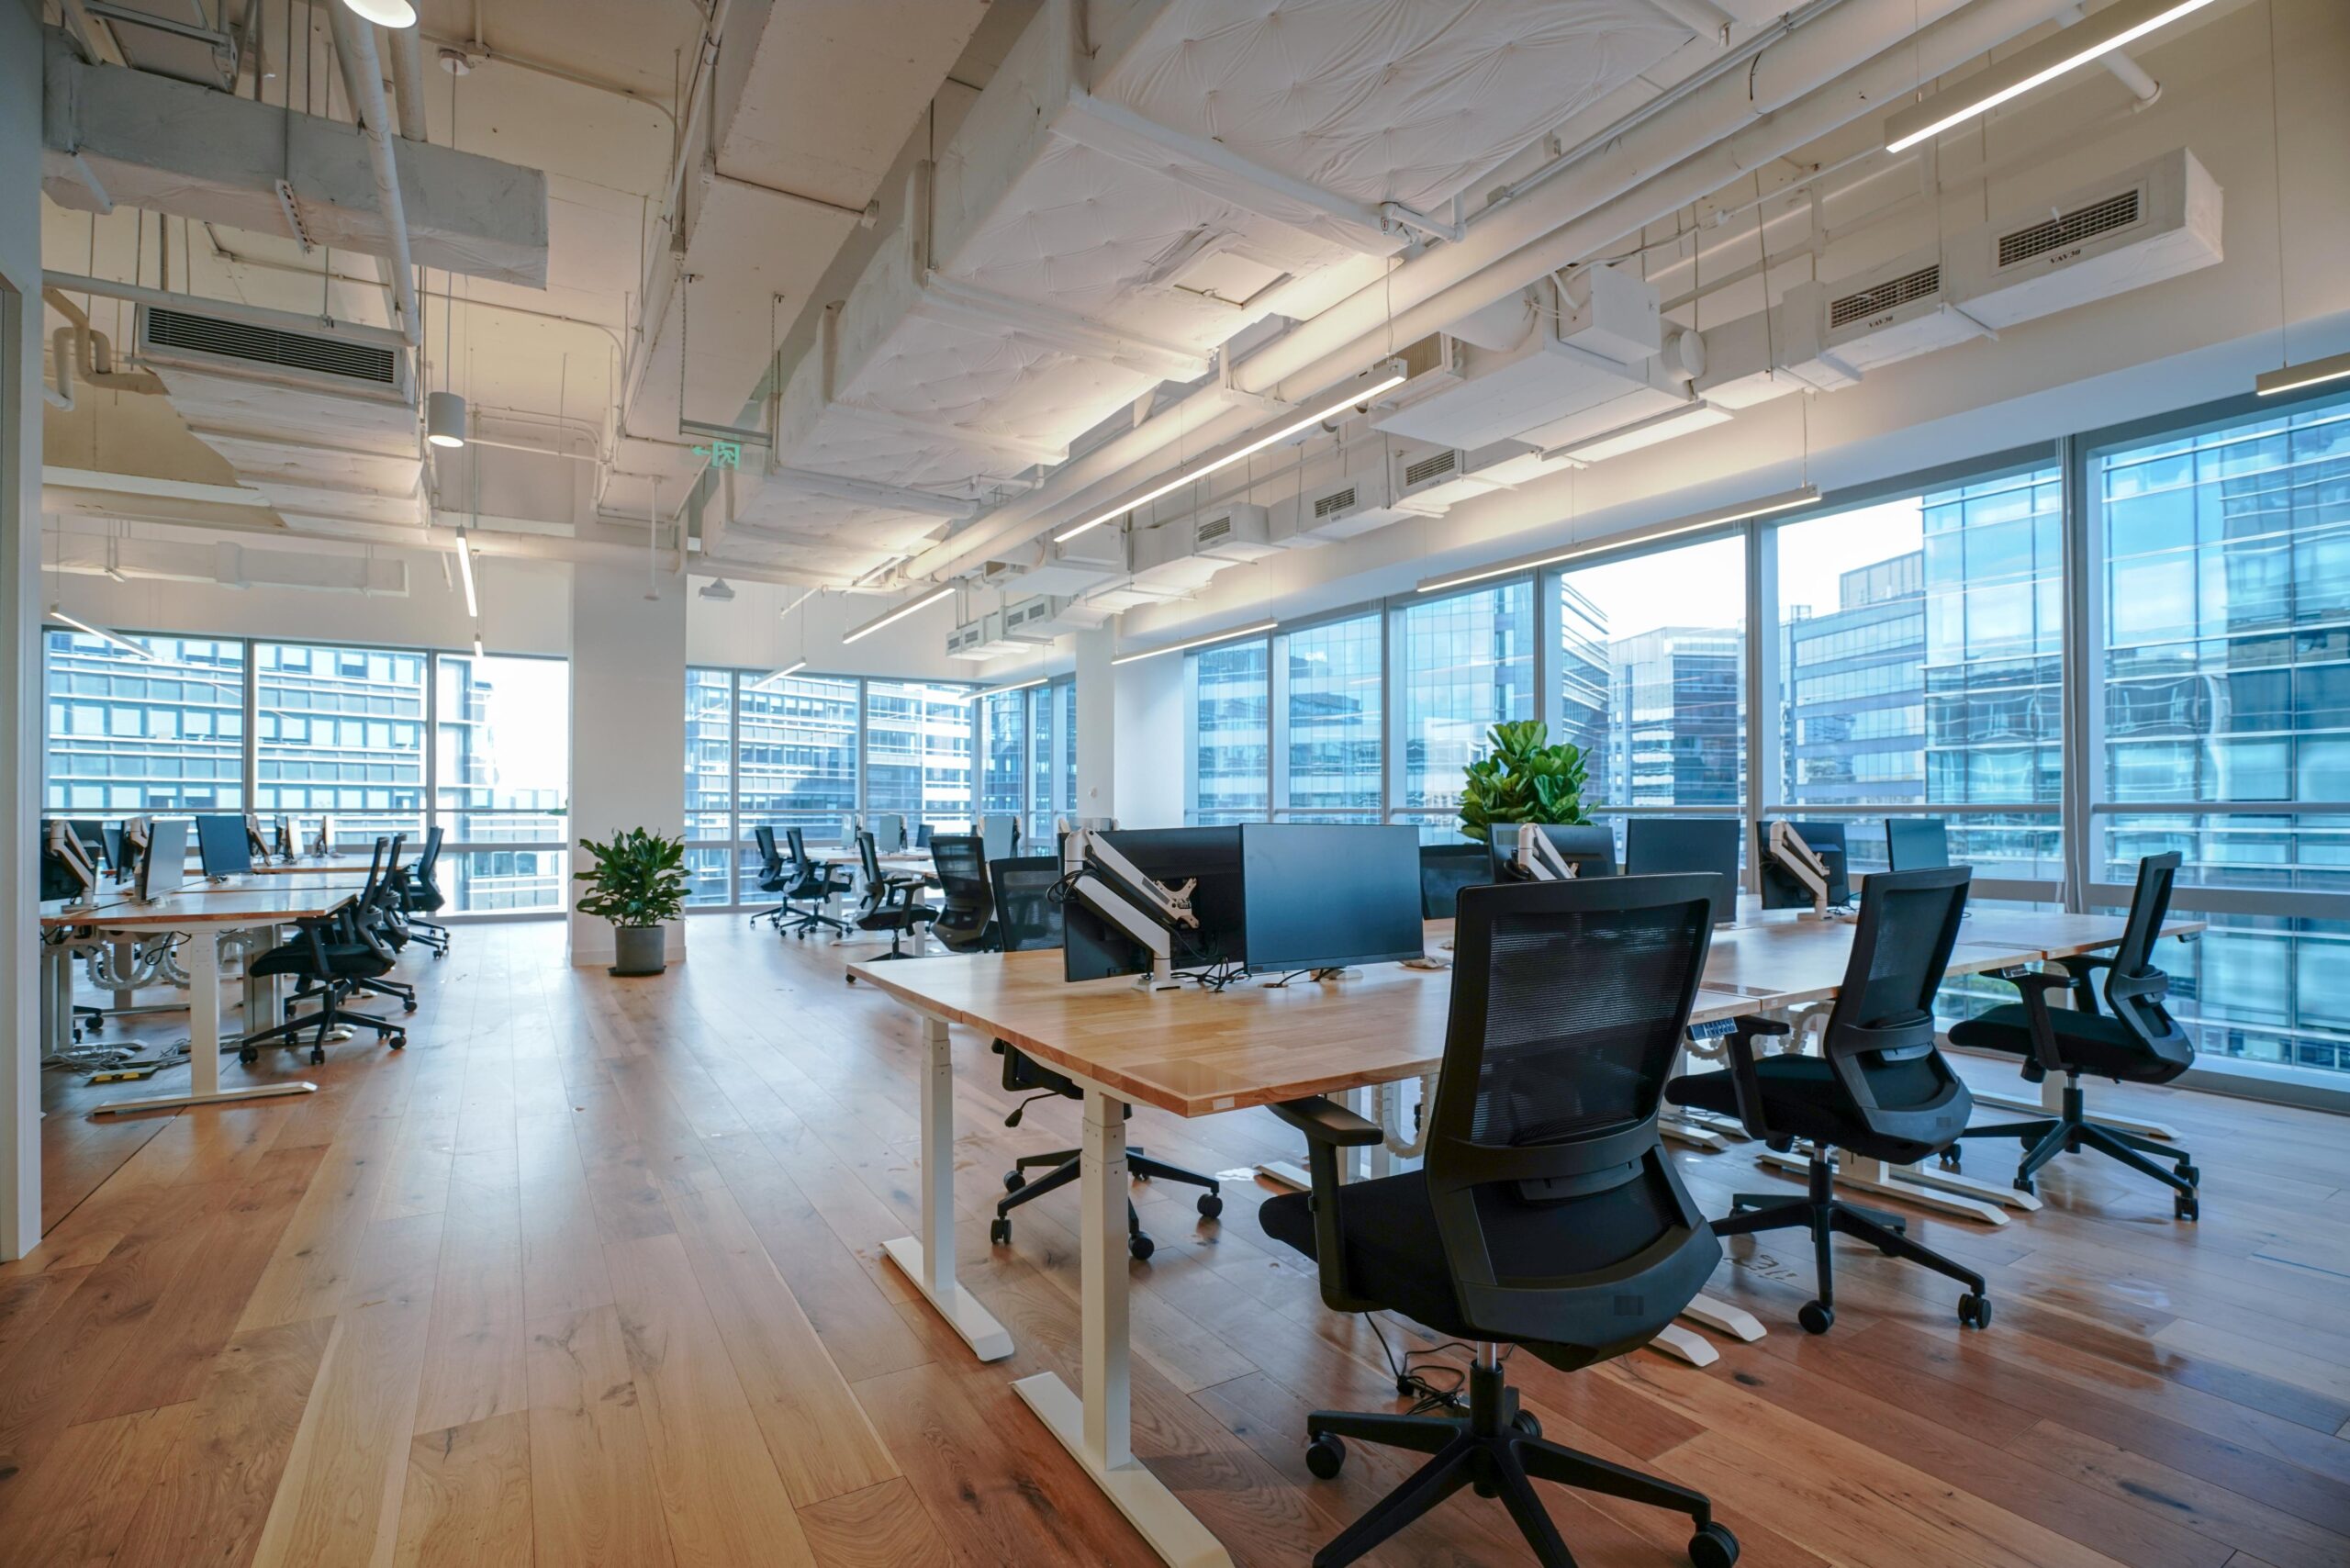 An open office space with wooden floors, filled with empty workstations and ergonomic chairs. Large windows provide abundant natural light and views of surrounding buildings. Several plants decorate the area.